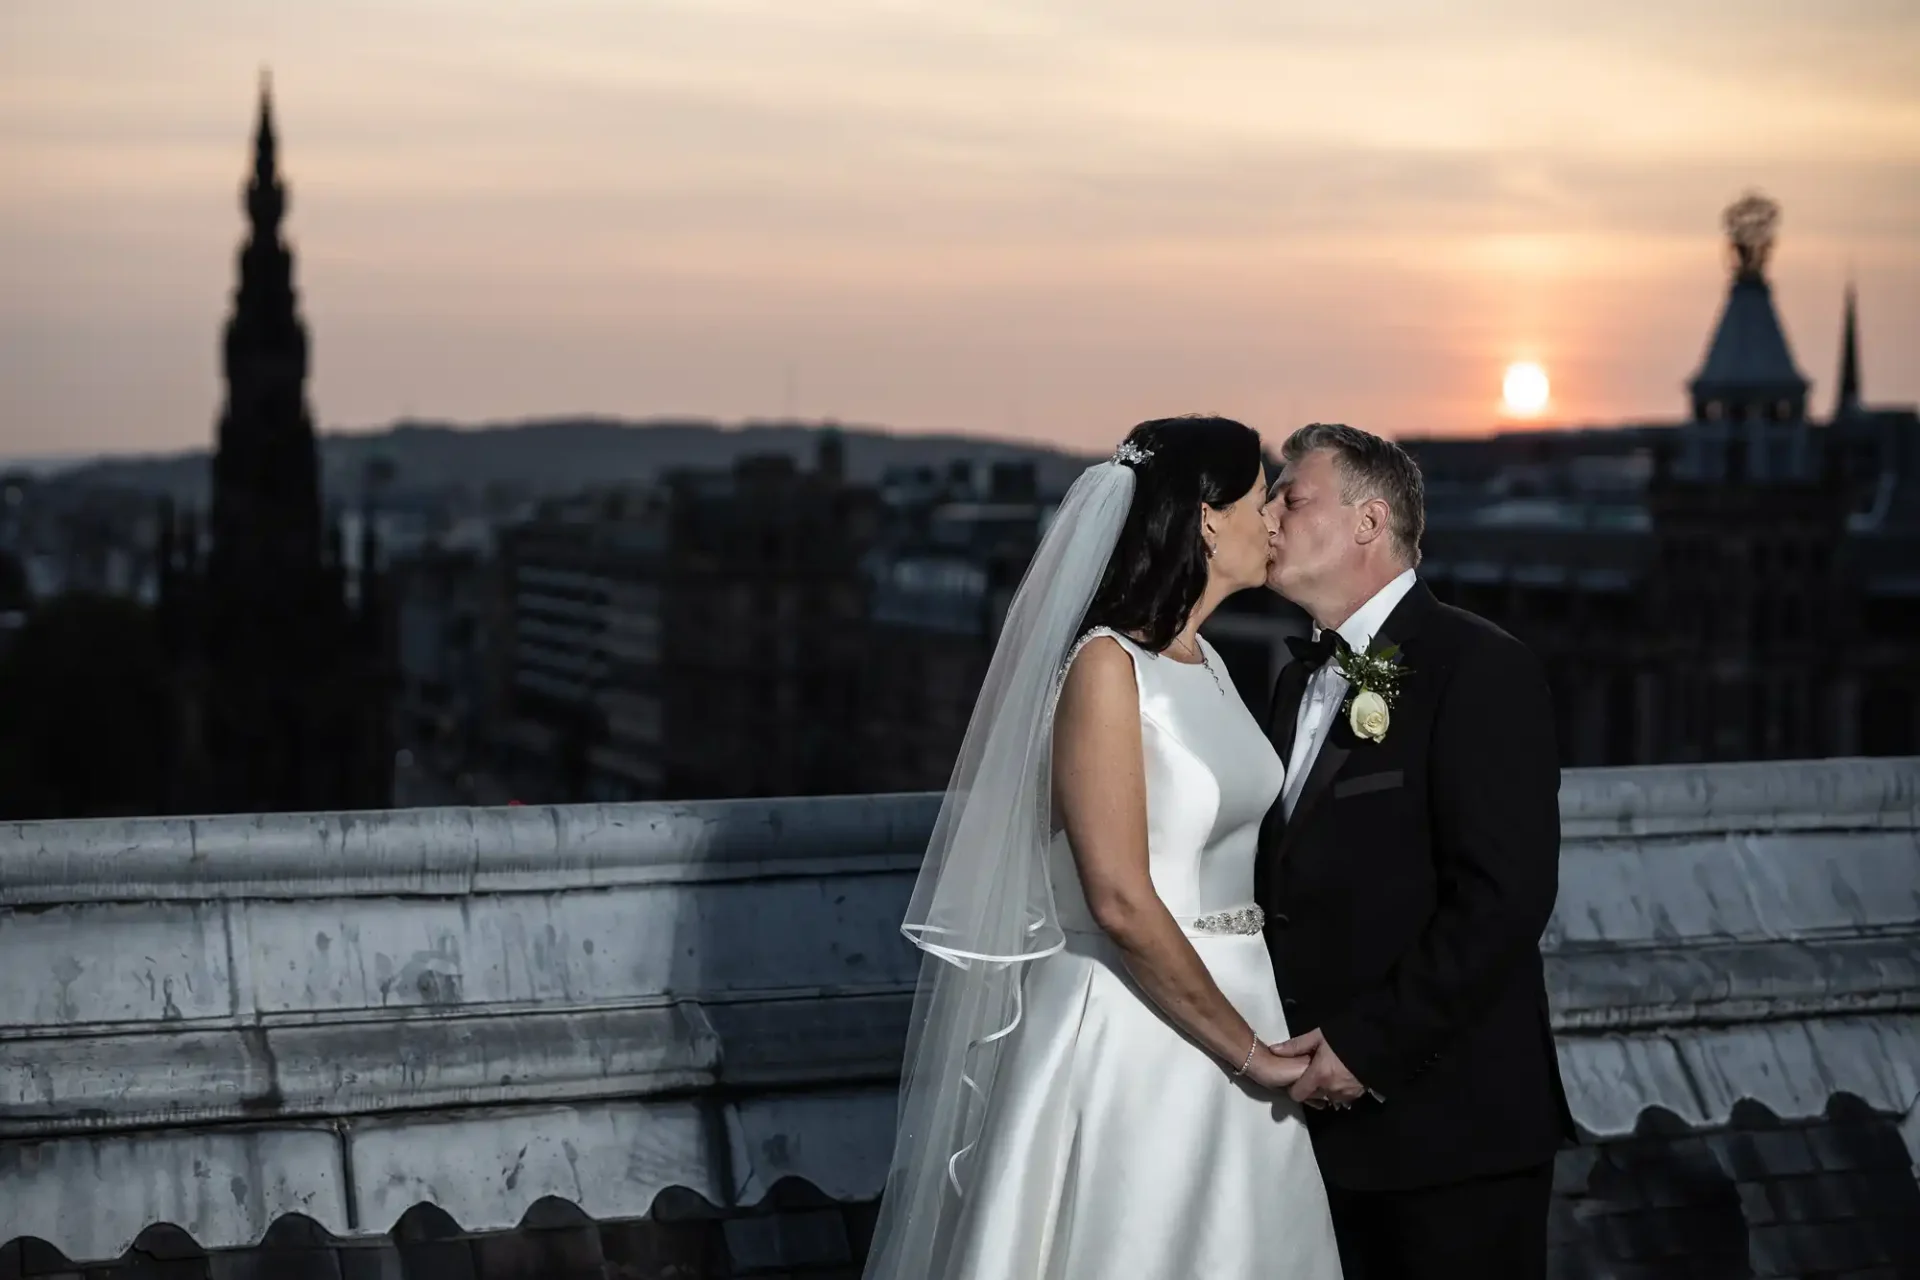 A bride and groom kissing at sunset on a rooftop with city skyline views.